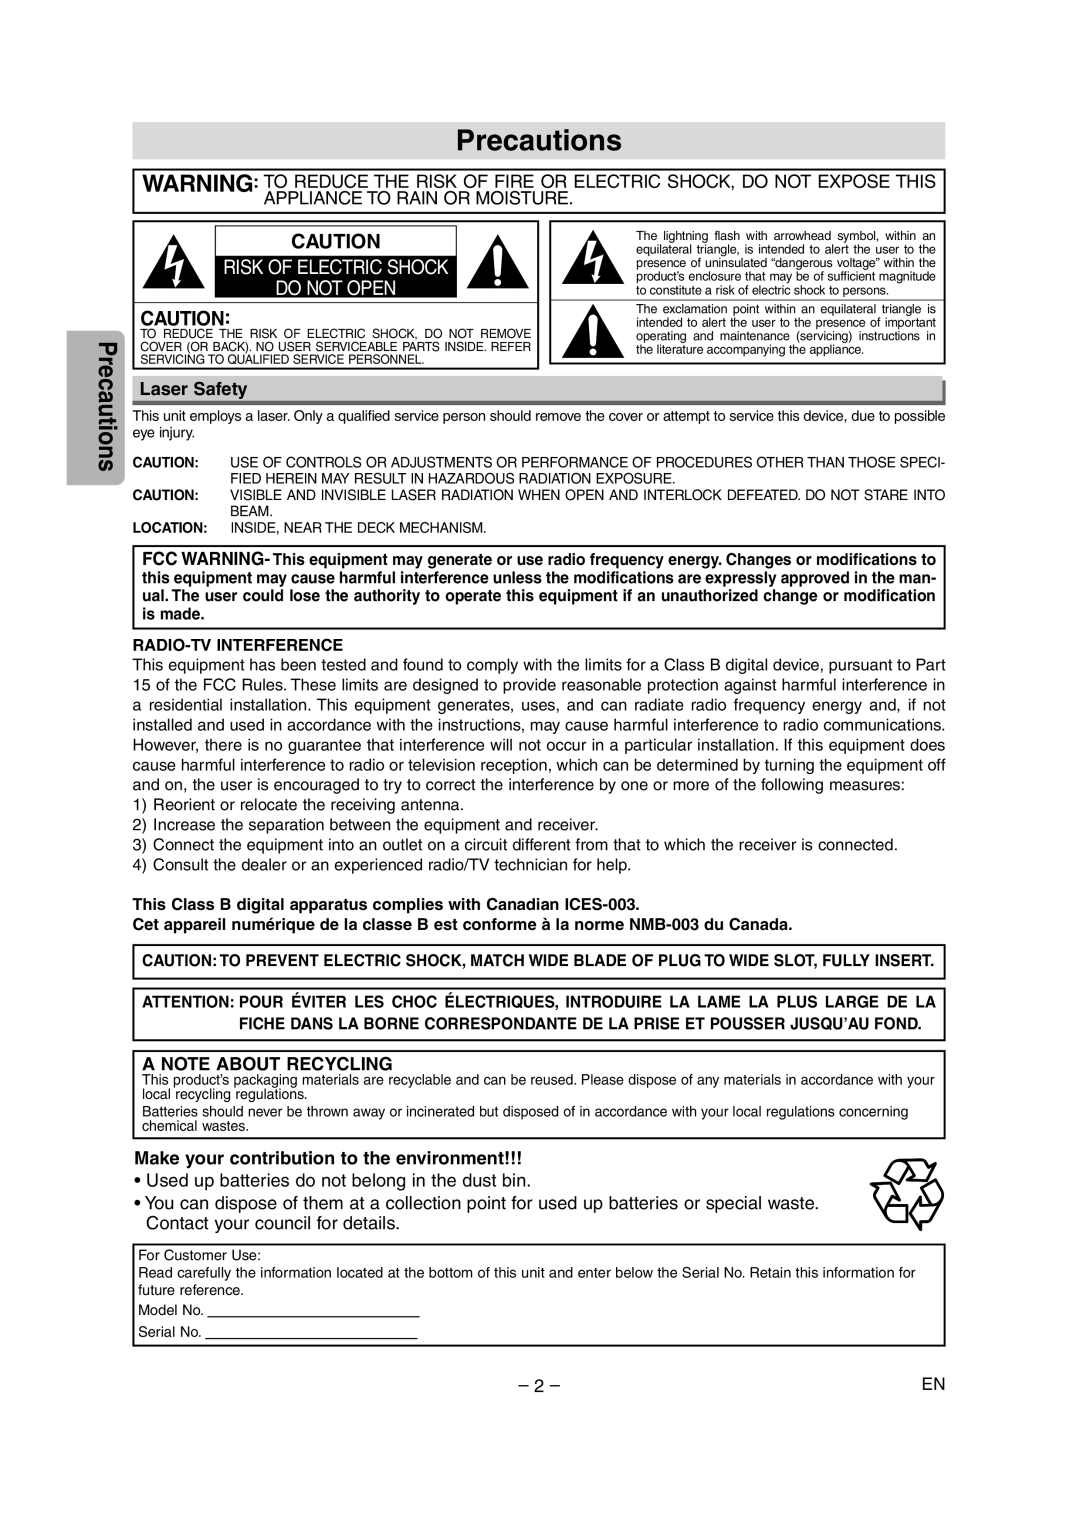 FUNAI MSD1005 Precautions, Risk Of Electric Shock Do Not Open, Laser Safety, A Note About Recycling, Radio-Tv Interference 